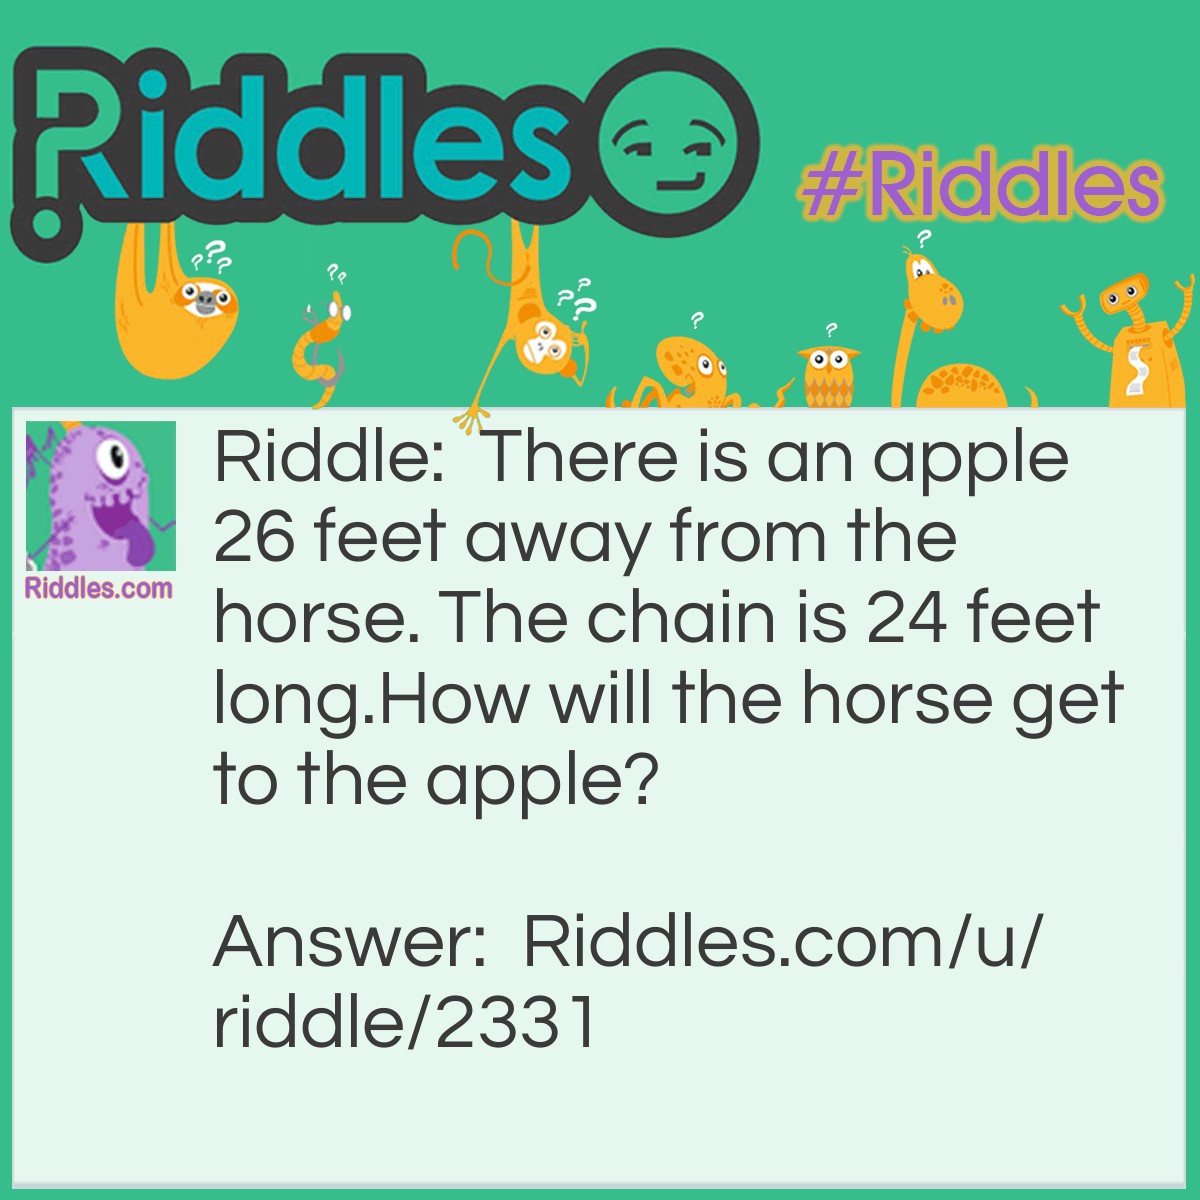 Riddle: There is an apple 26 feet away from the horse. The chain is 24 feet long. How will the horse get to the apple? Answer: <a href="/easy-riddles">Easy</a>, just walk there. The chain isn't tied to anything.